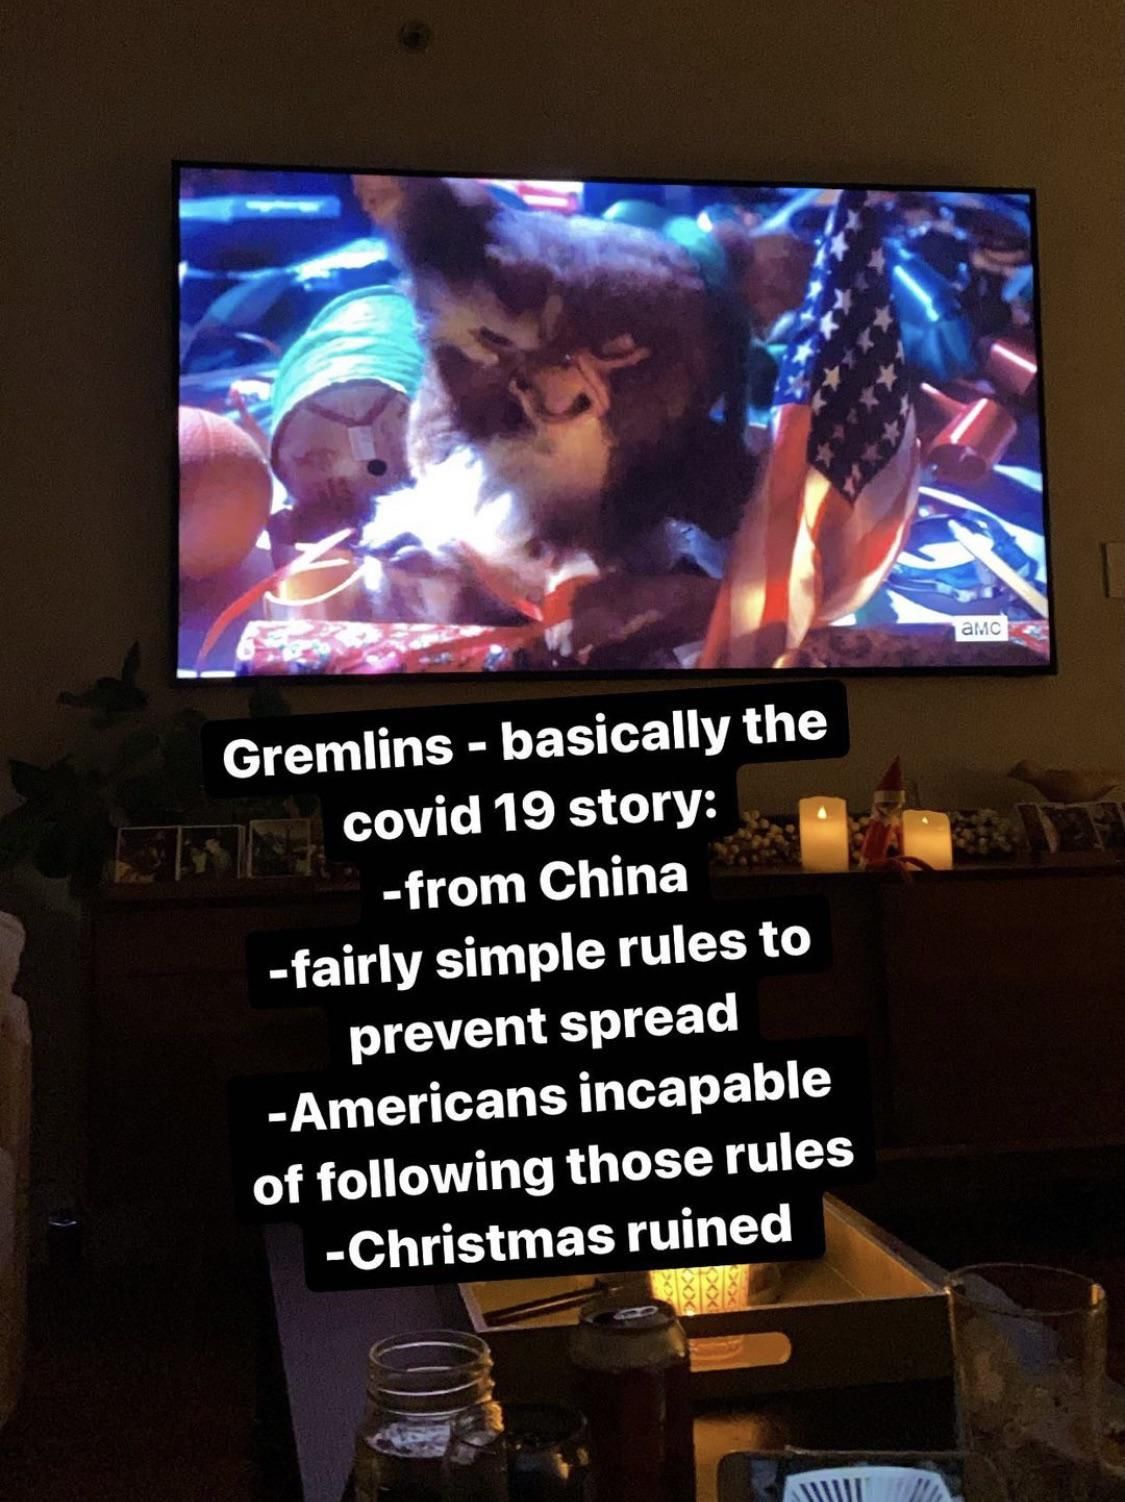 Gremlins - basically the COVID-19 story